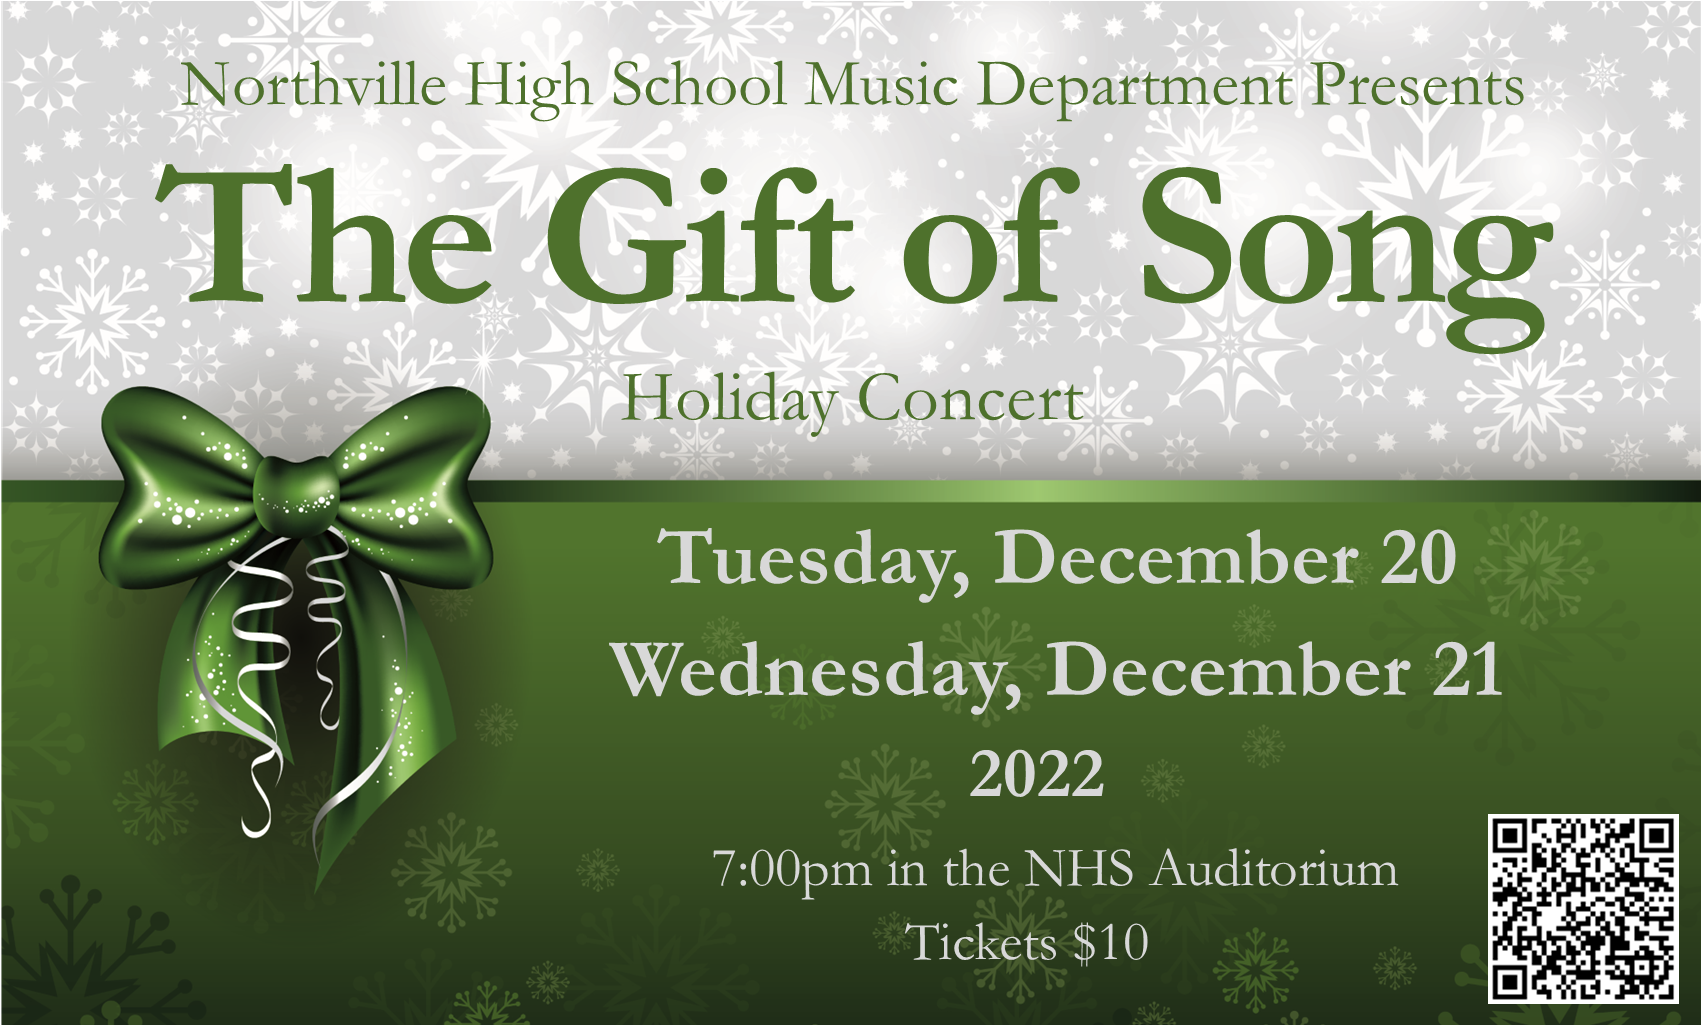 The Gift of Song Holiday Concert Tuesday, December 20. Wednesday, December 21 2022. 7:00pm in the NHS Auditorium. Tickets $10